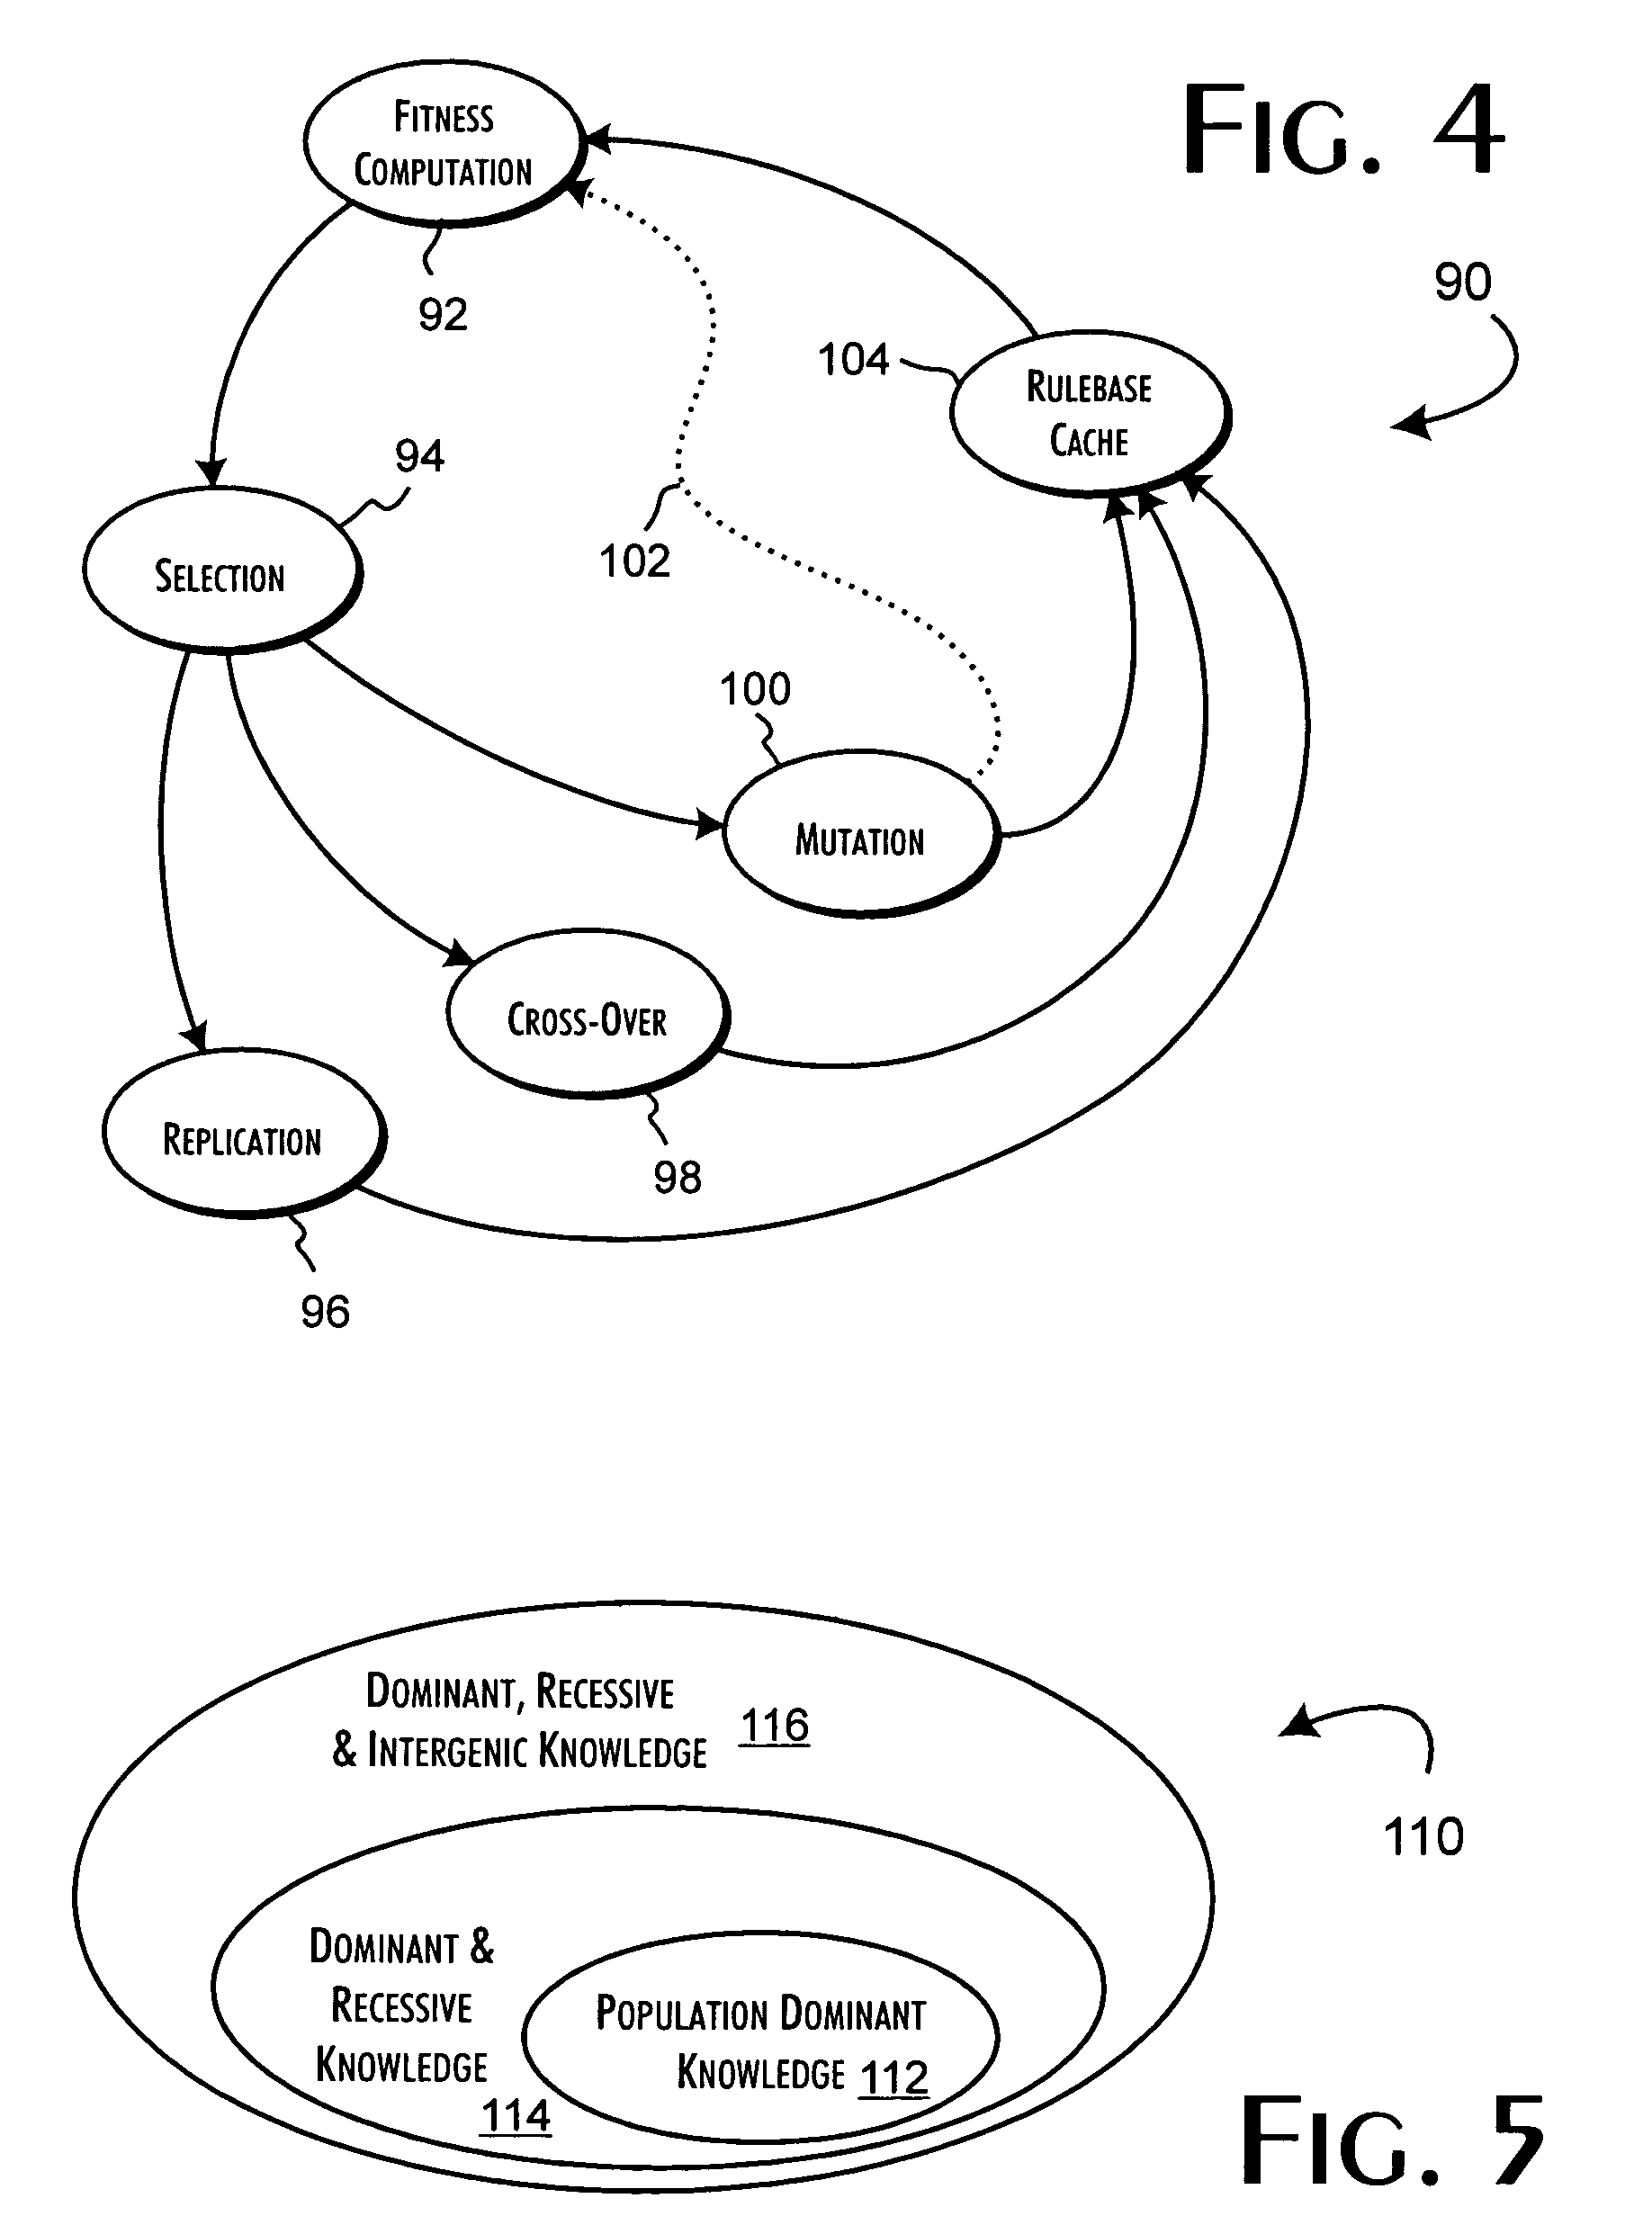 Concurrent two-phase completion genetic algorithm system and methods